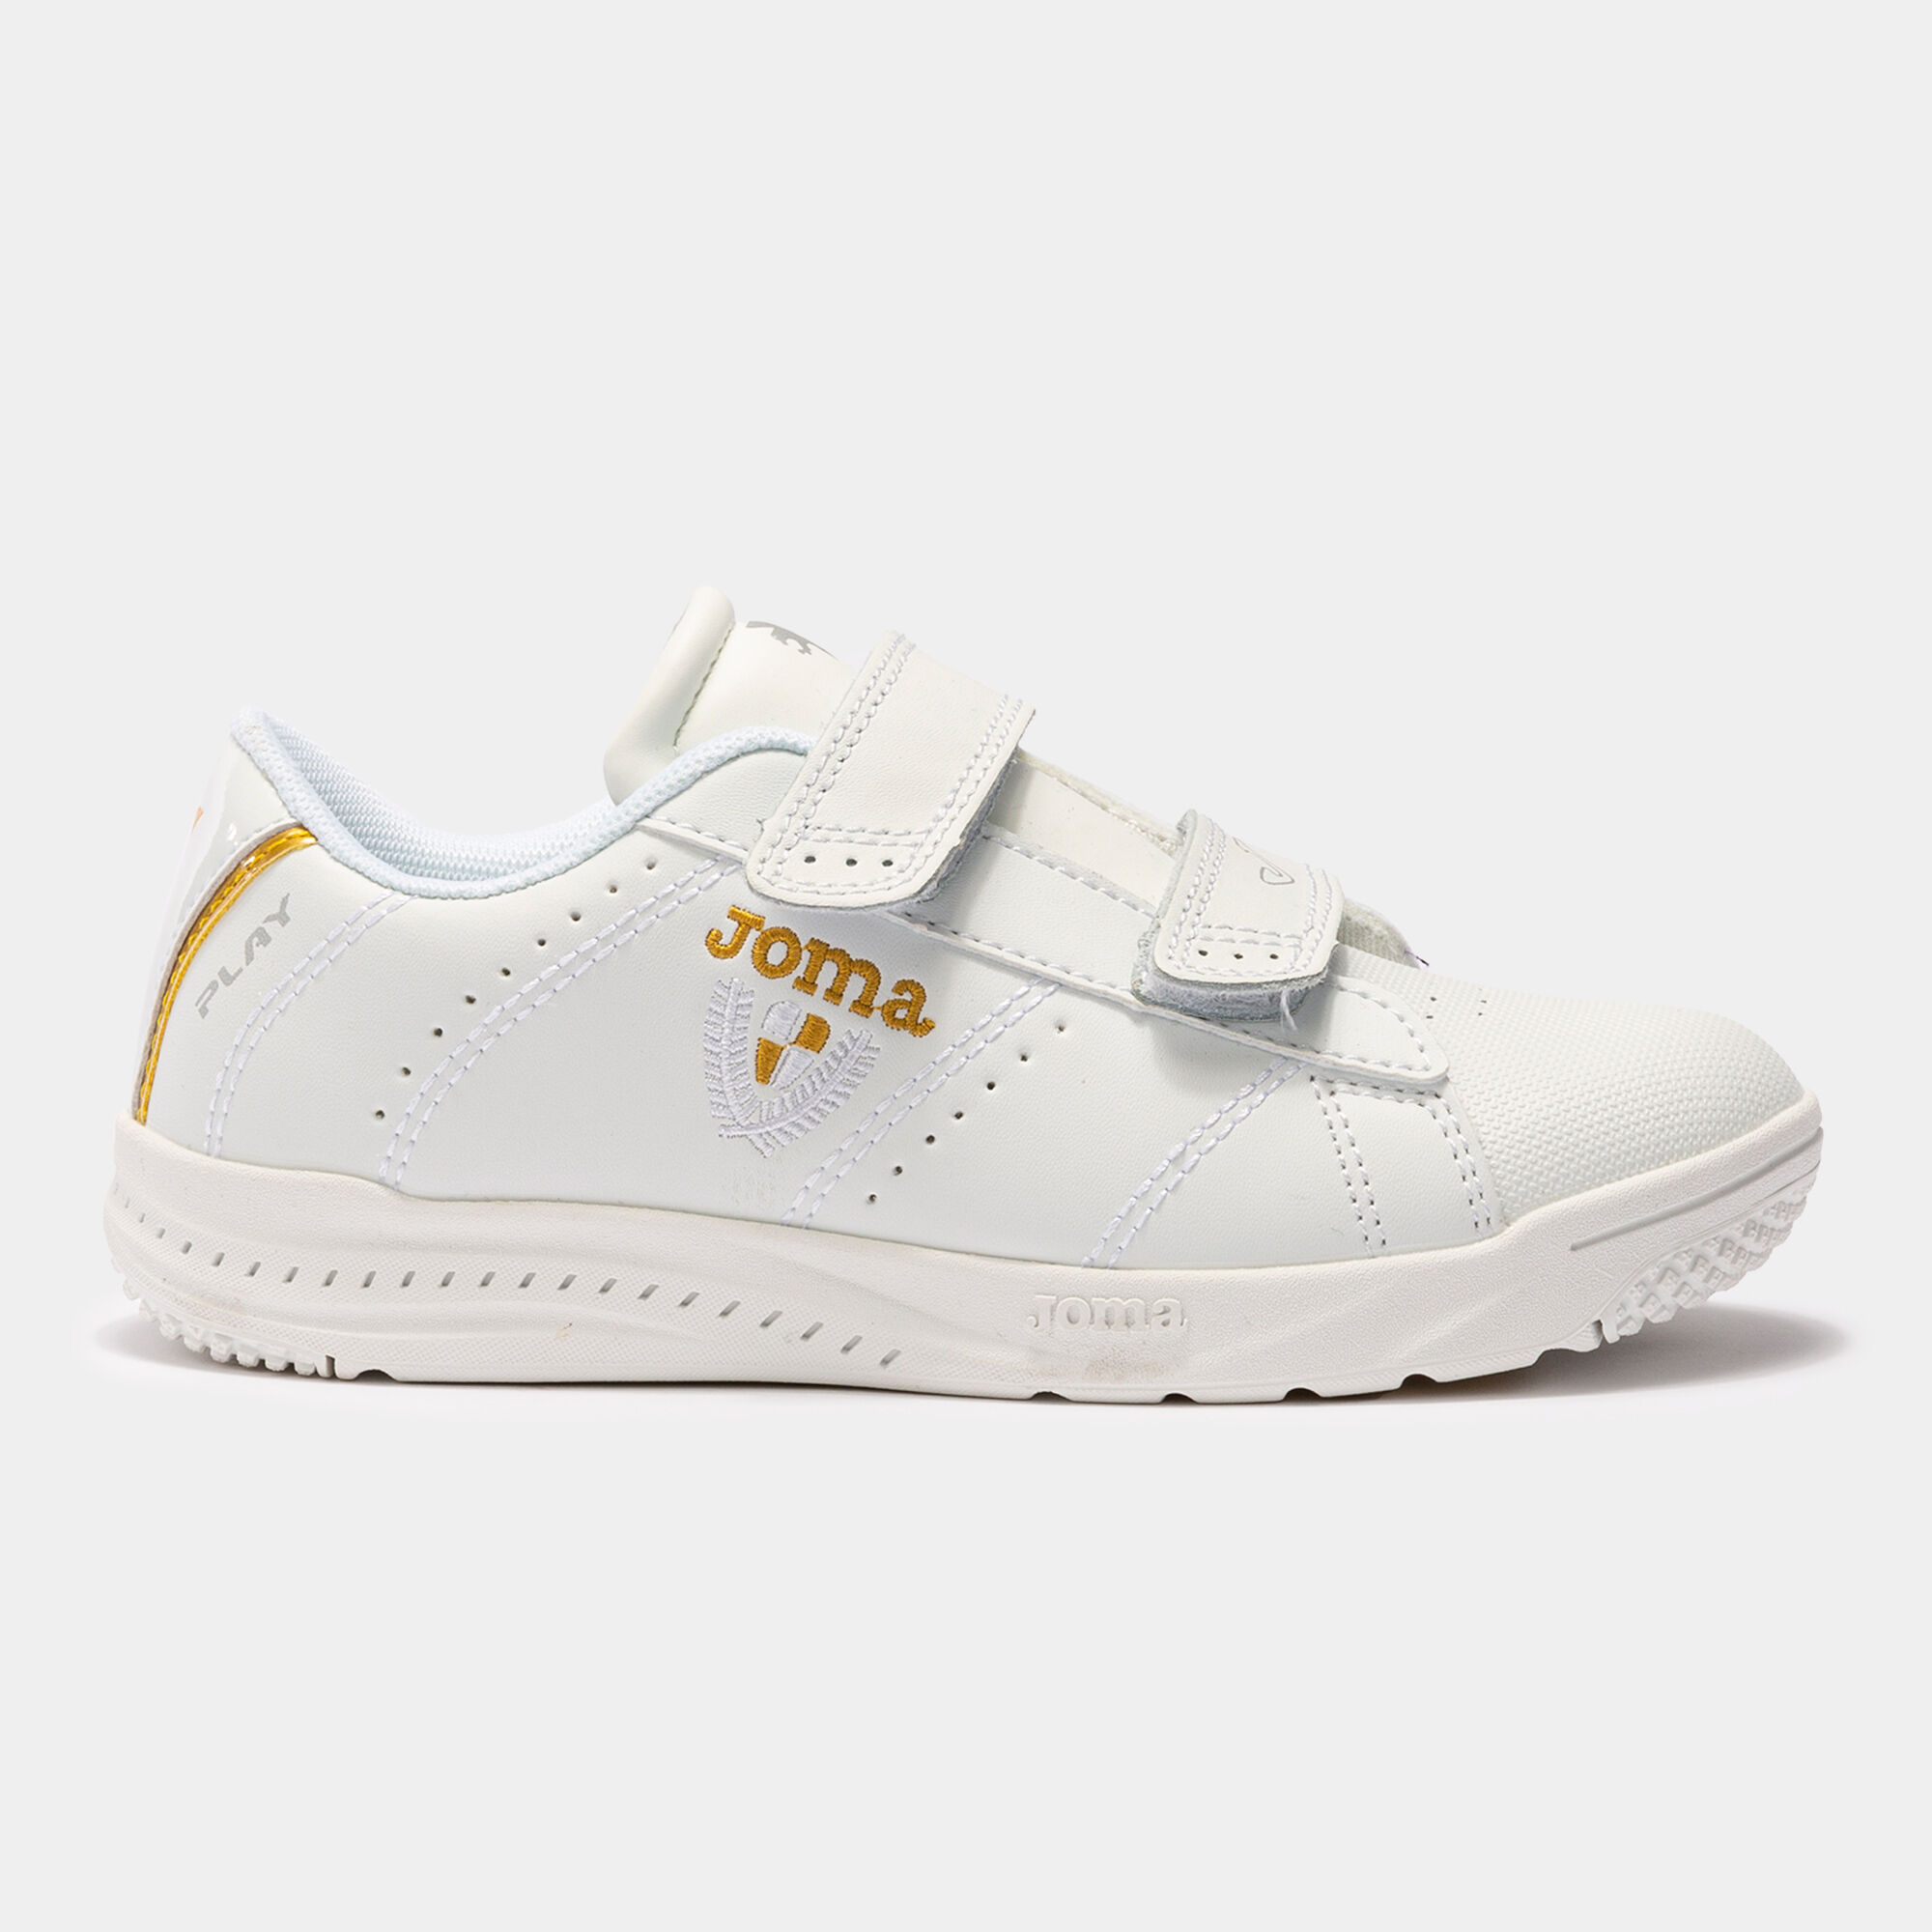 CHAUSSURES CASUAL PLAY 22 JUNIOR BLANC OR